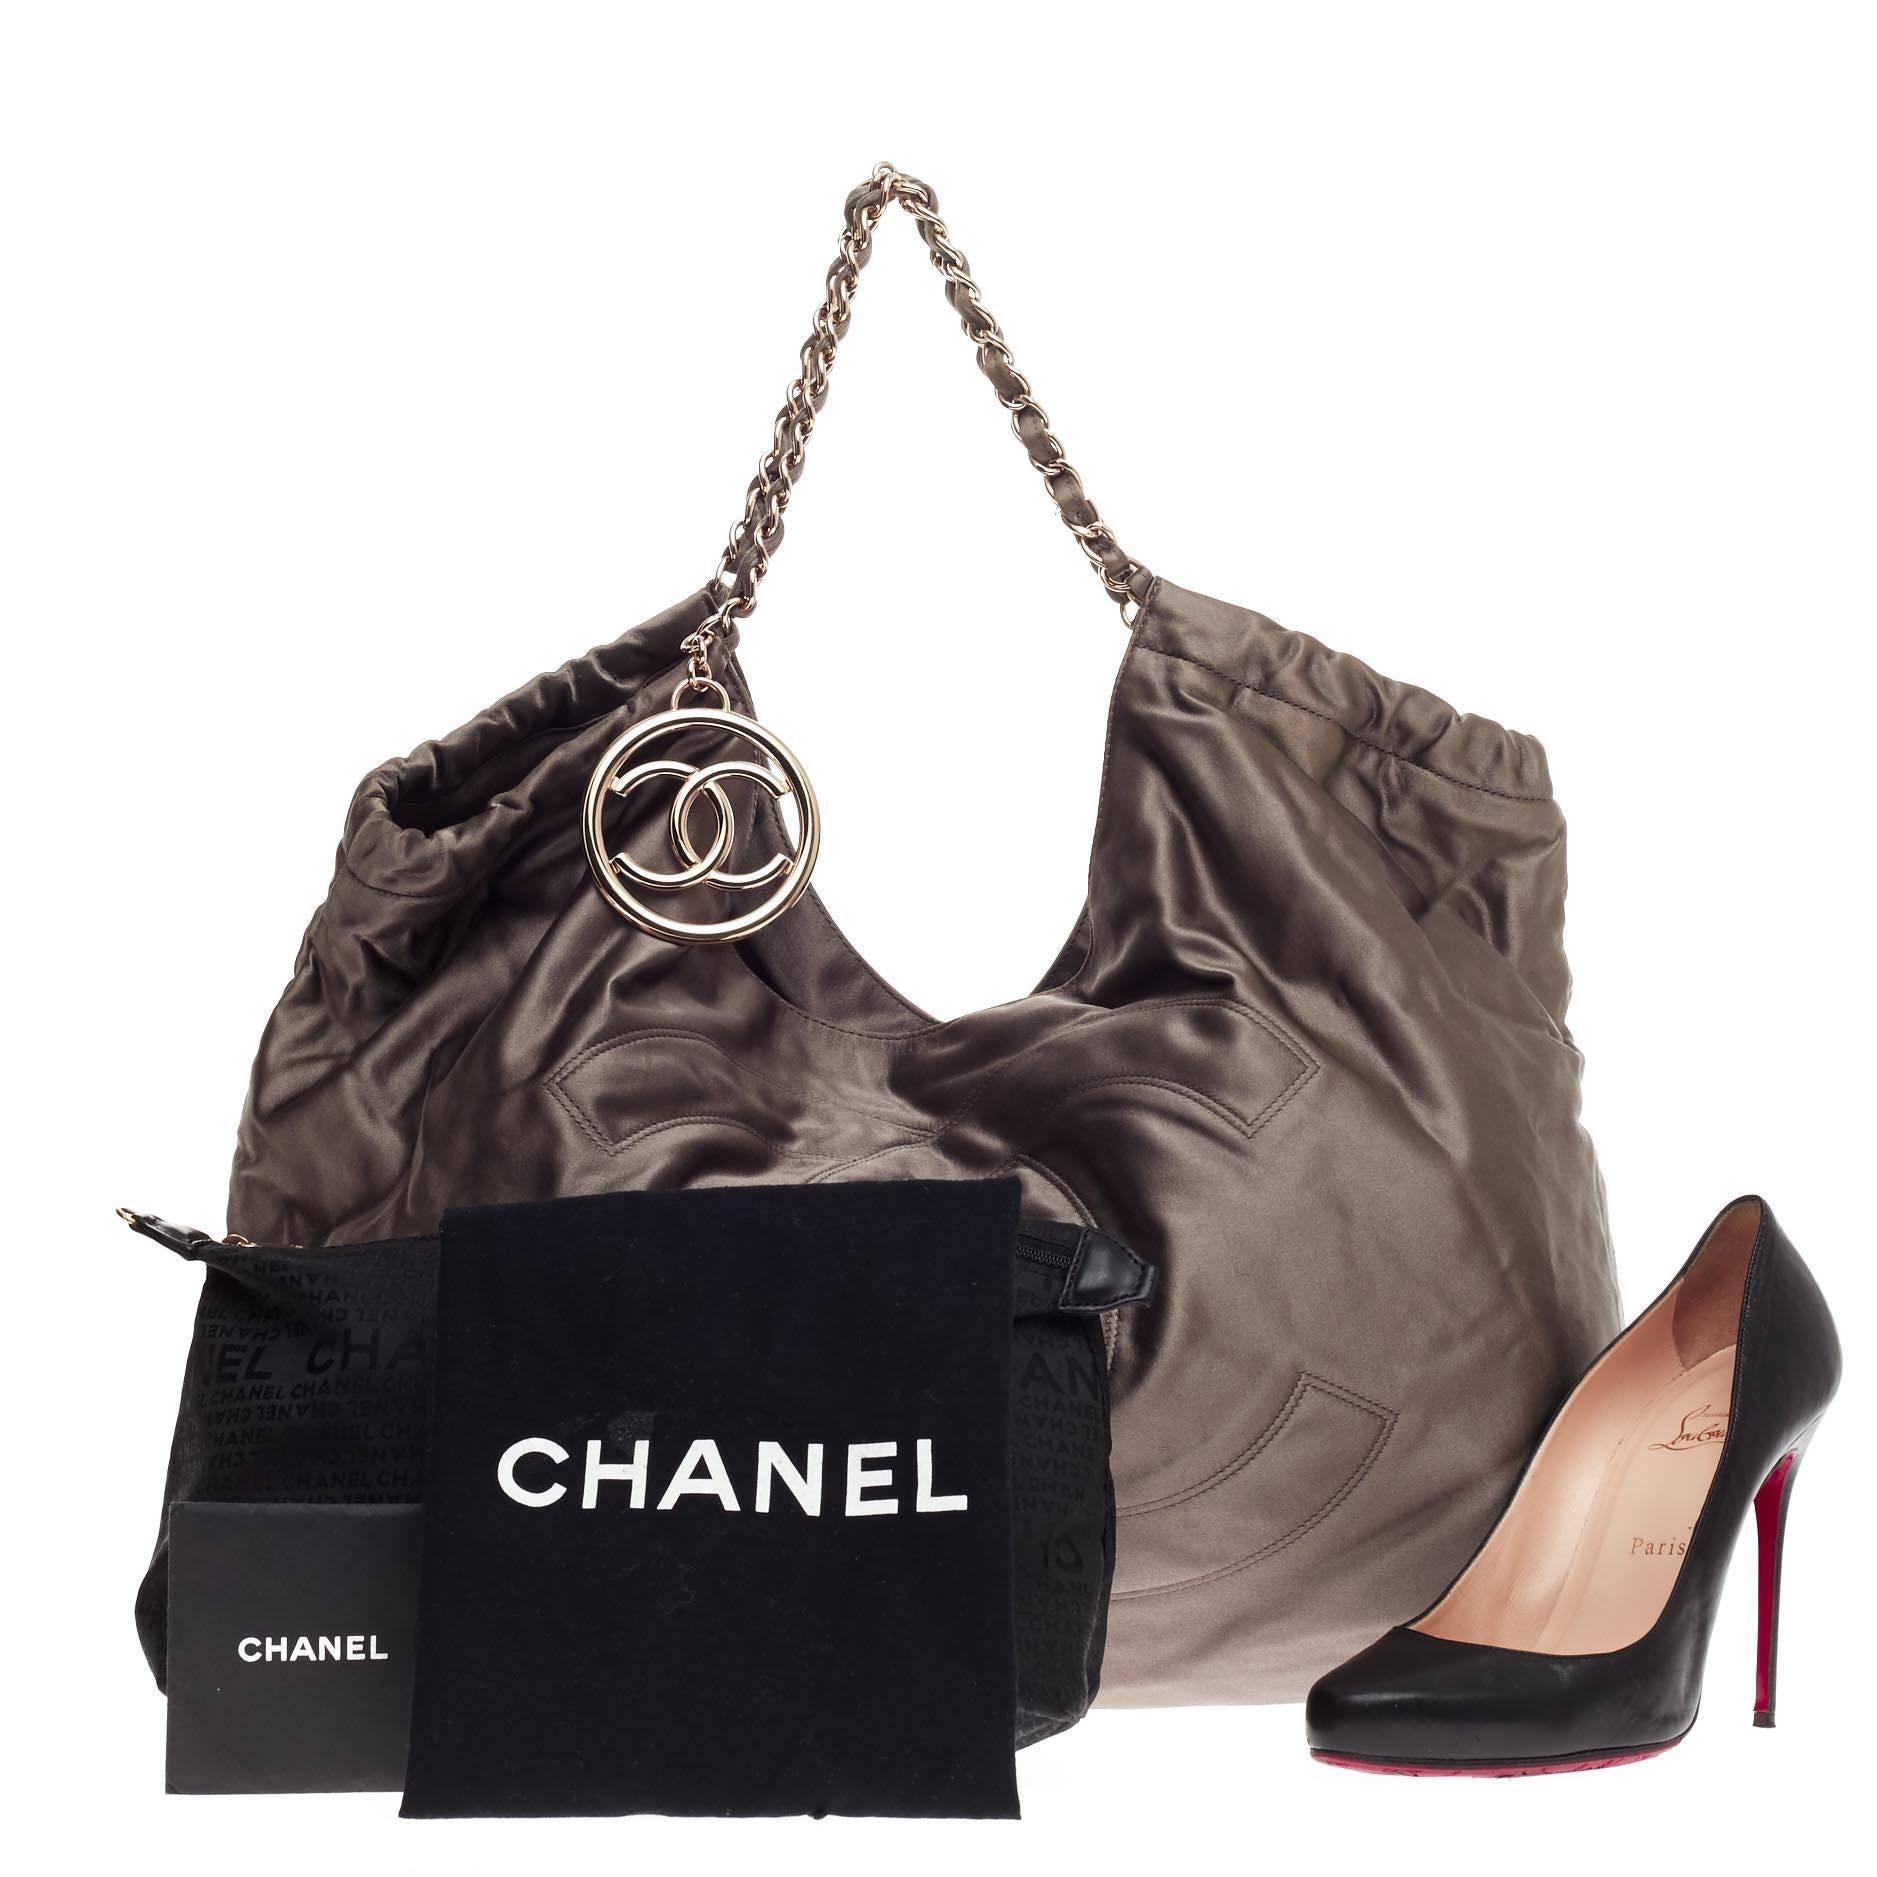 This authentic Chanel Coco Cabas Satin Large is perfect for your casual wear. Crafted from gray satin, this roomy hobo features an oversized stitched Chanel CC frontal logo, ruching detail, CC silver charm, woven-in satin chain strap, and